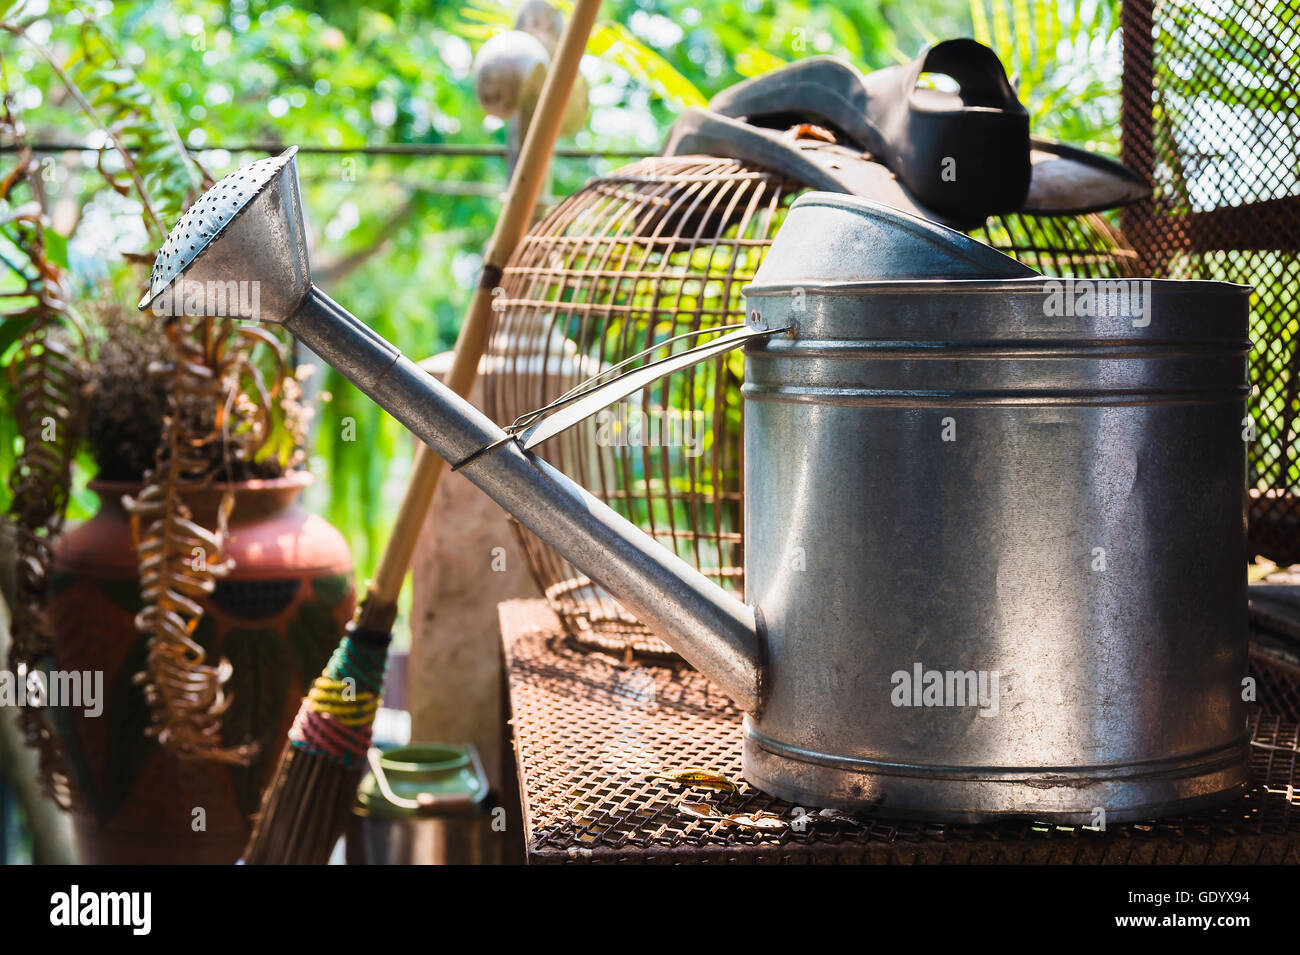 Watering can on rusty table, bird cage background Stock Photo